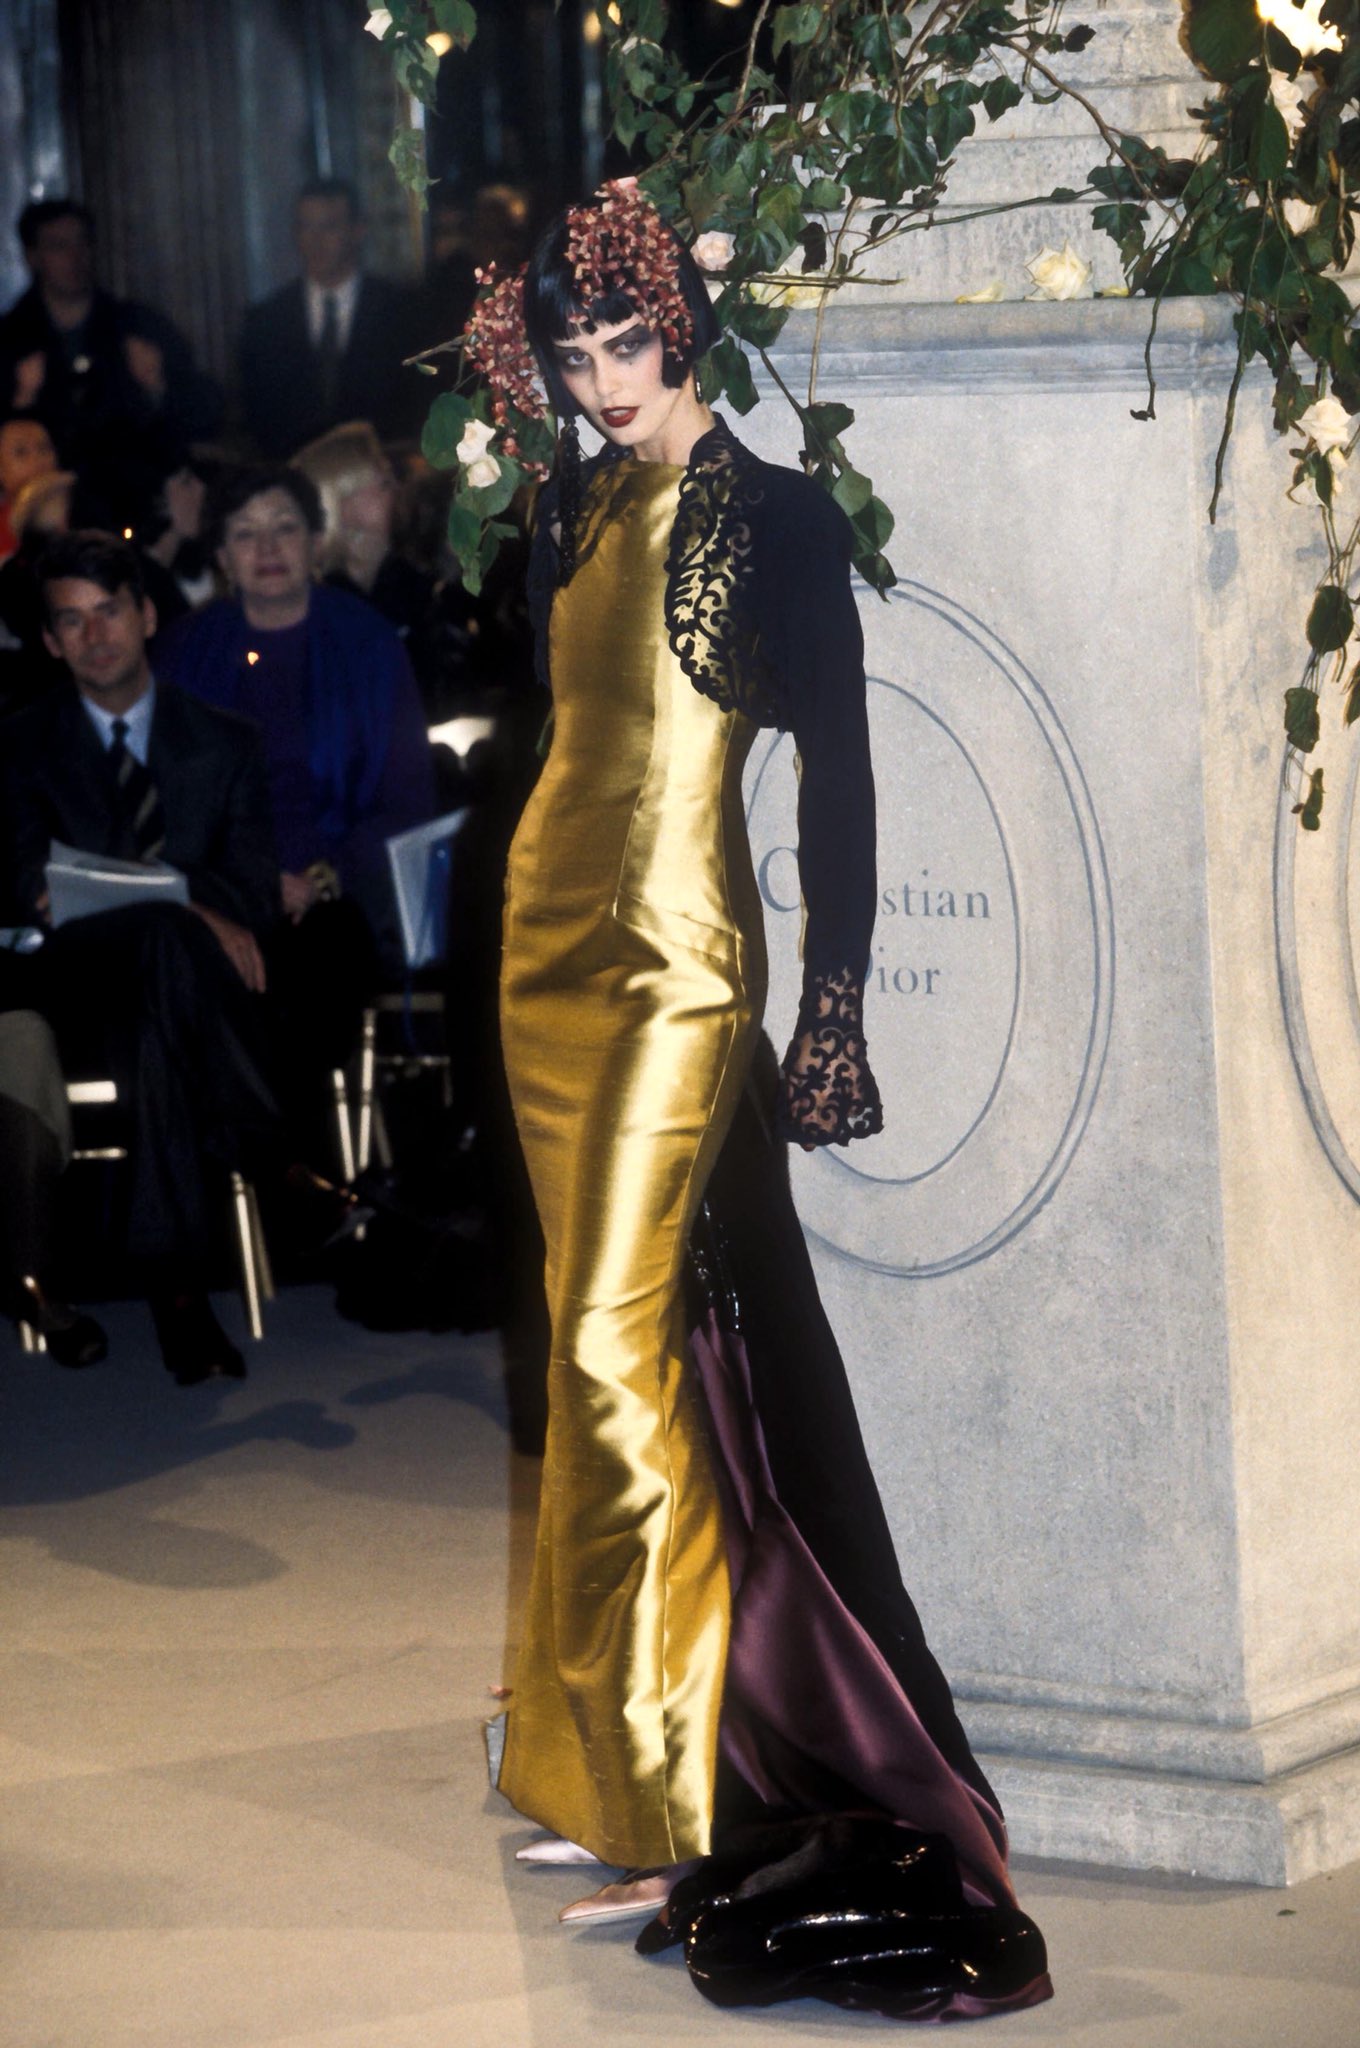 Nathan on X: christian dior haute couture s/s 1997, john galliano's grand  debut collection for the house  / X